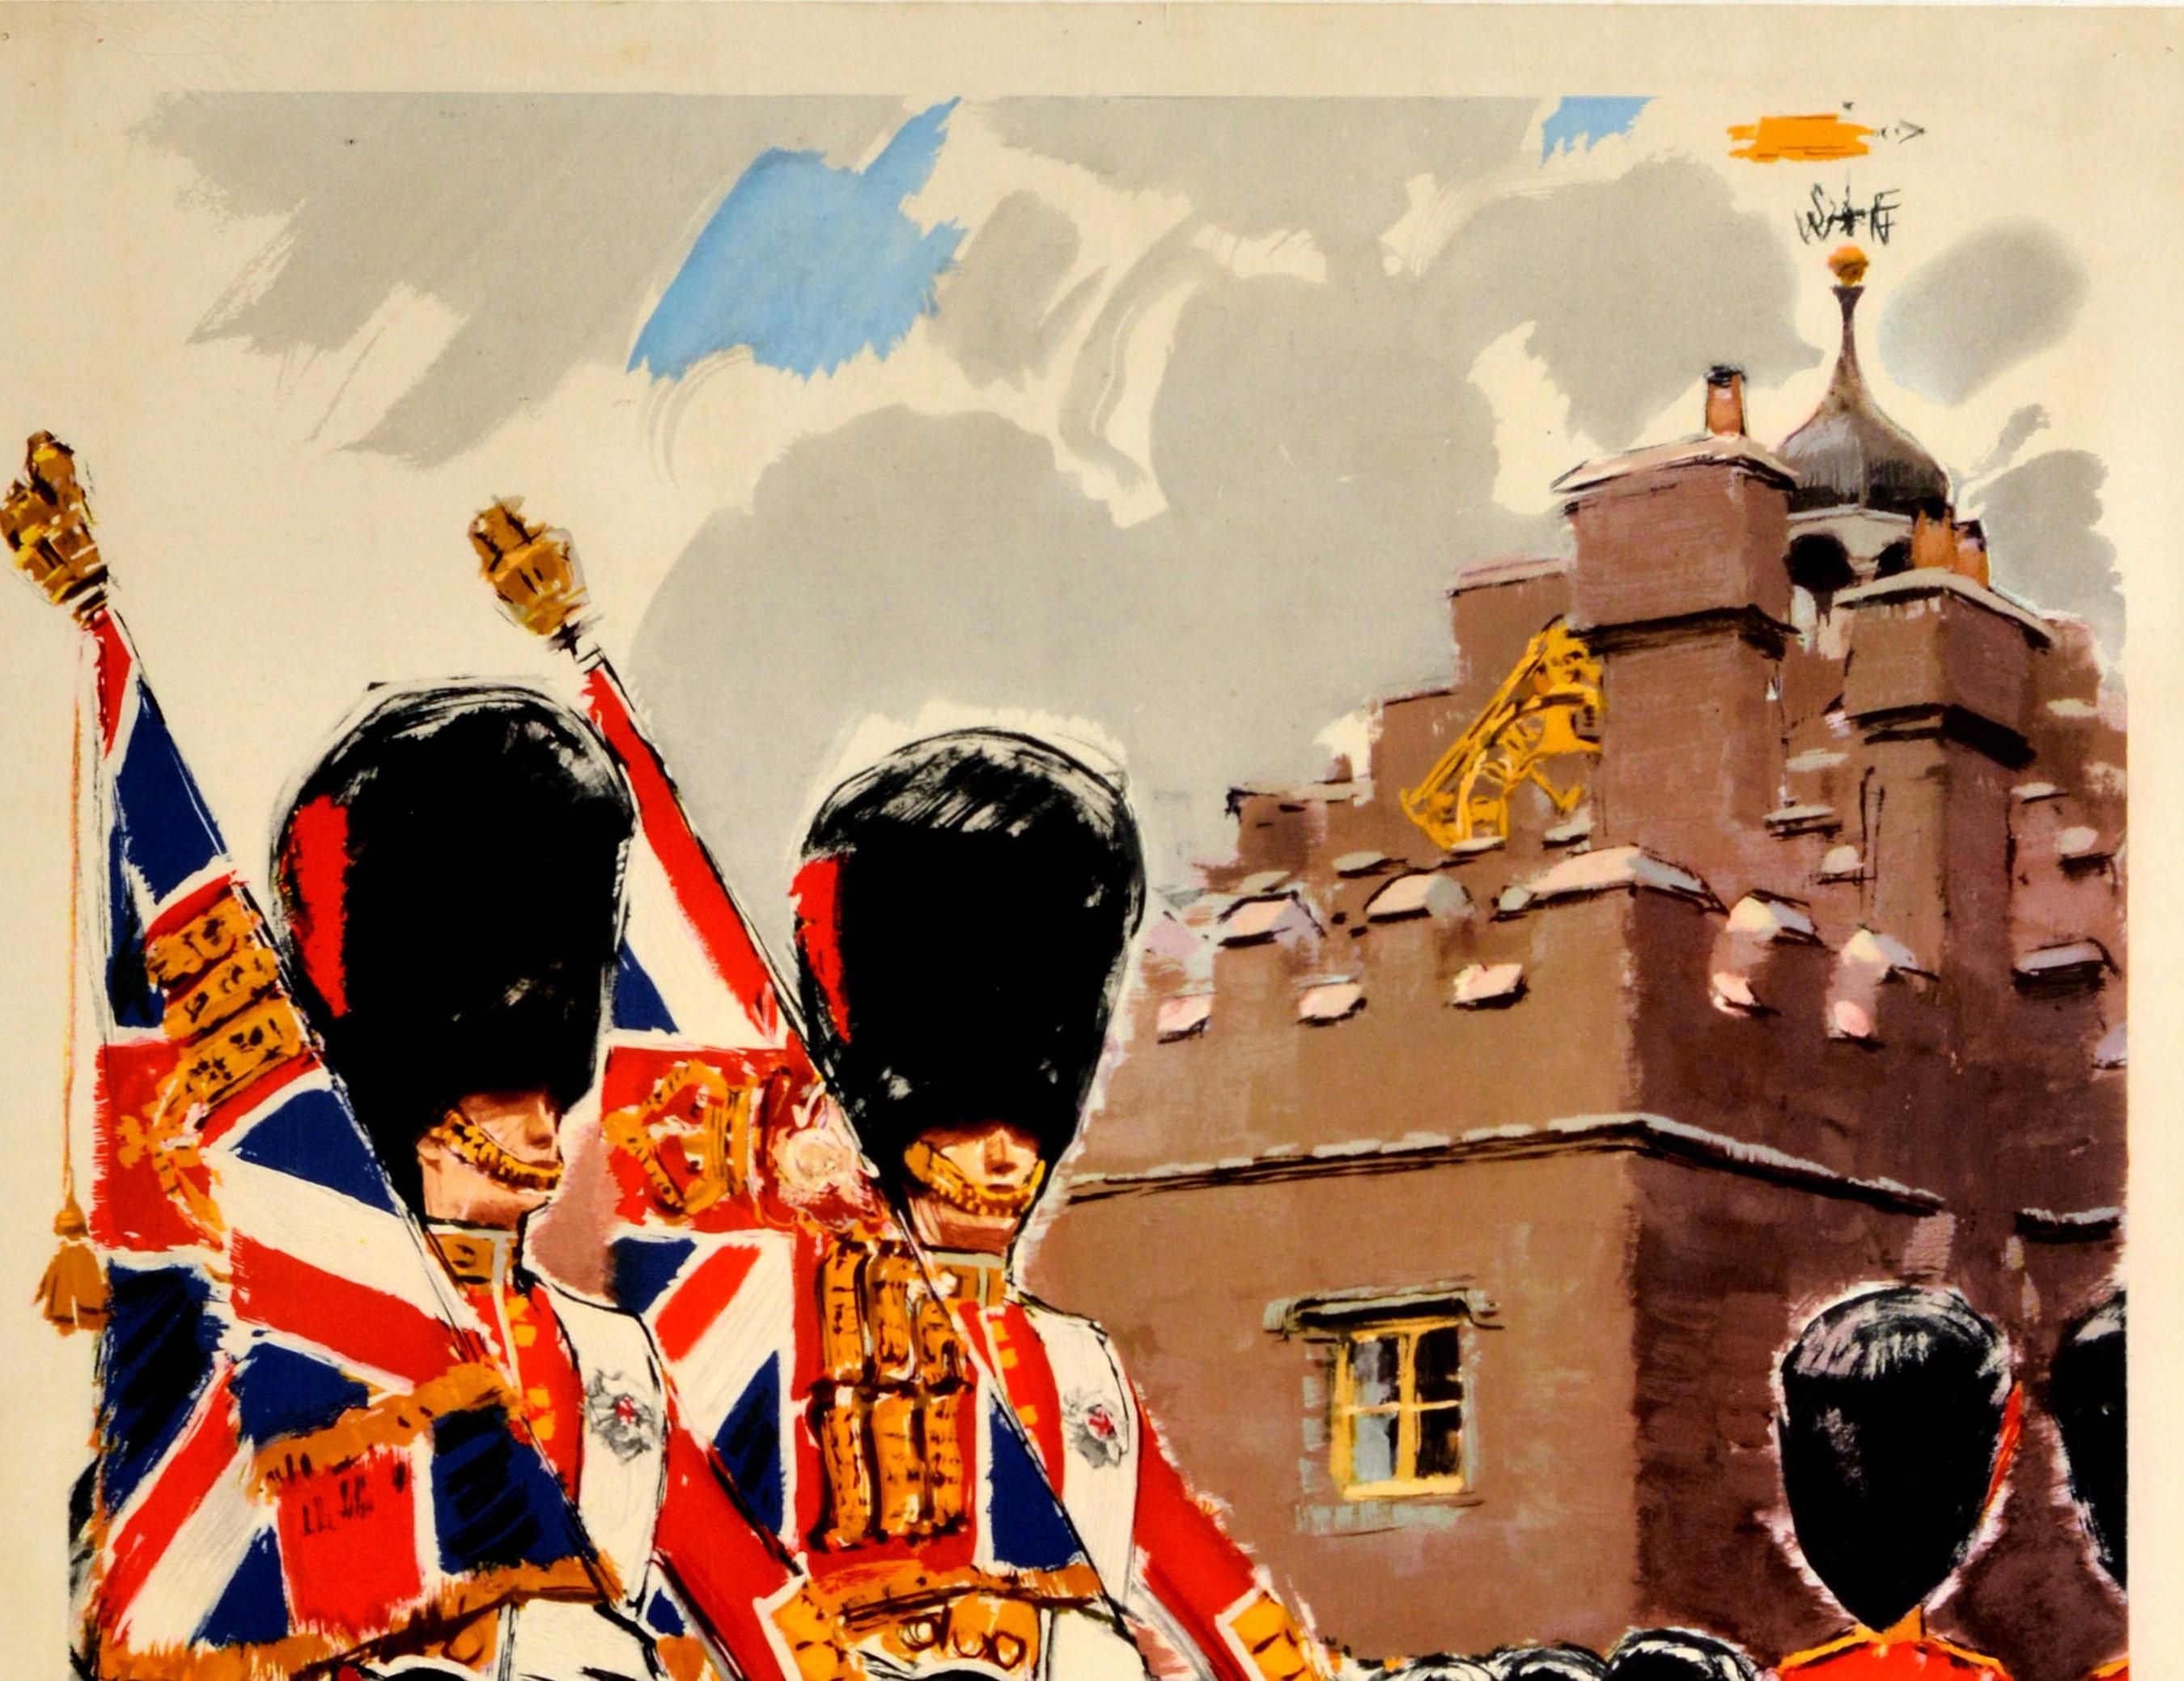 Original Vintage Travel Poster Ceremonial In Britain Royal Coldstream Guards Art - Print by A. Brenet